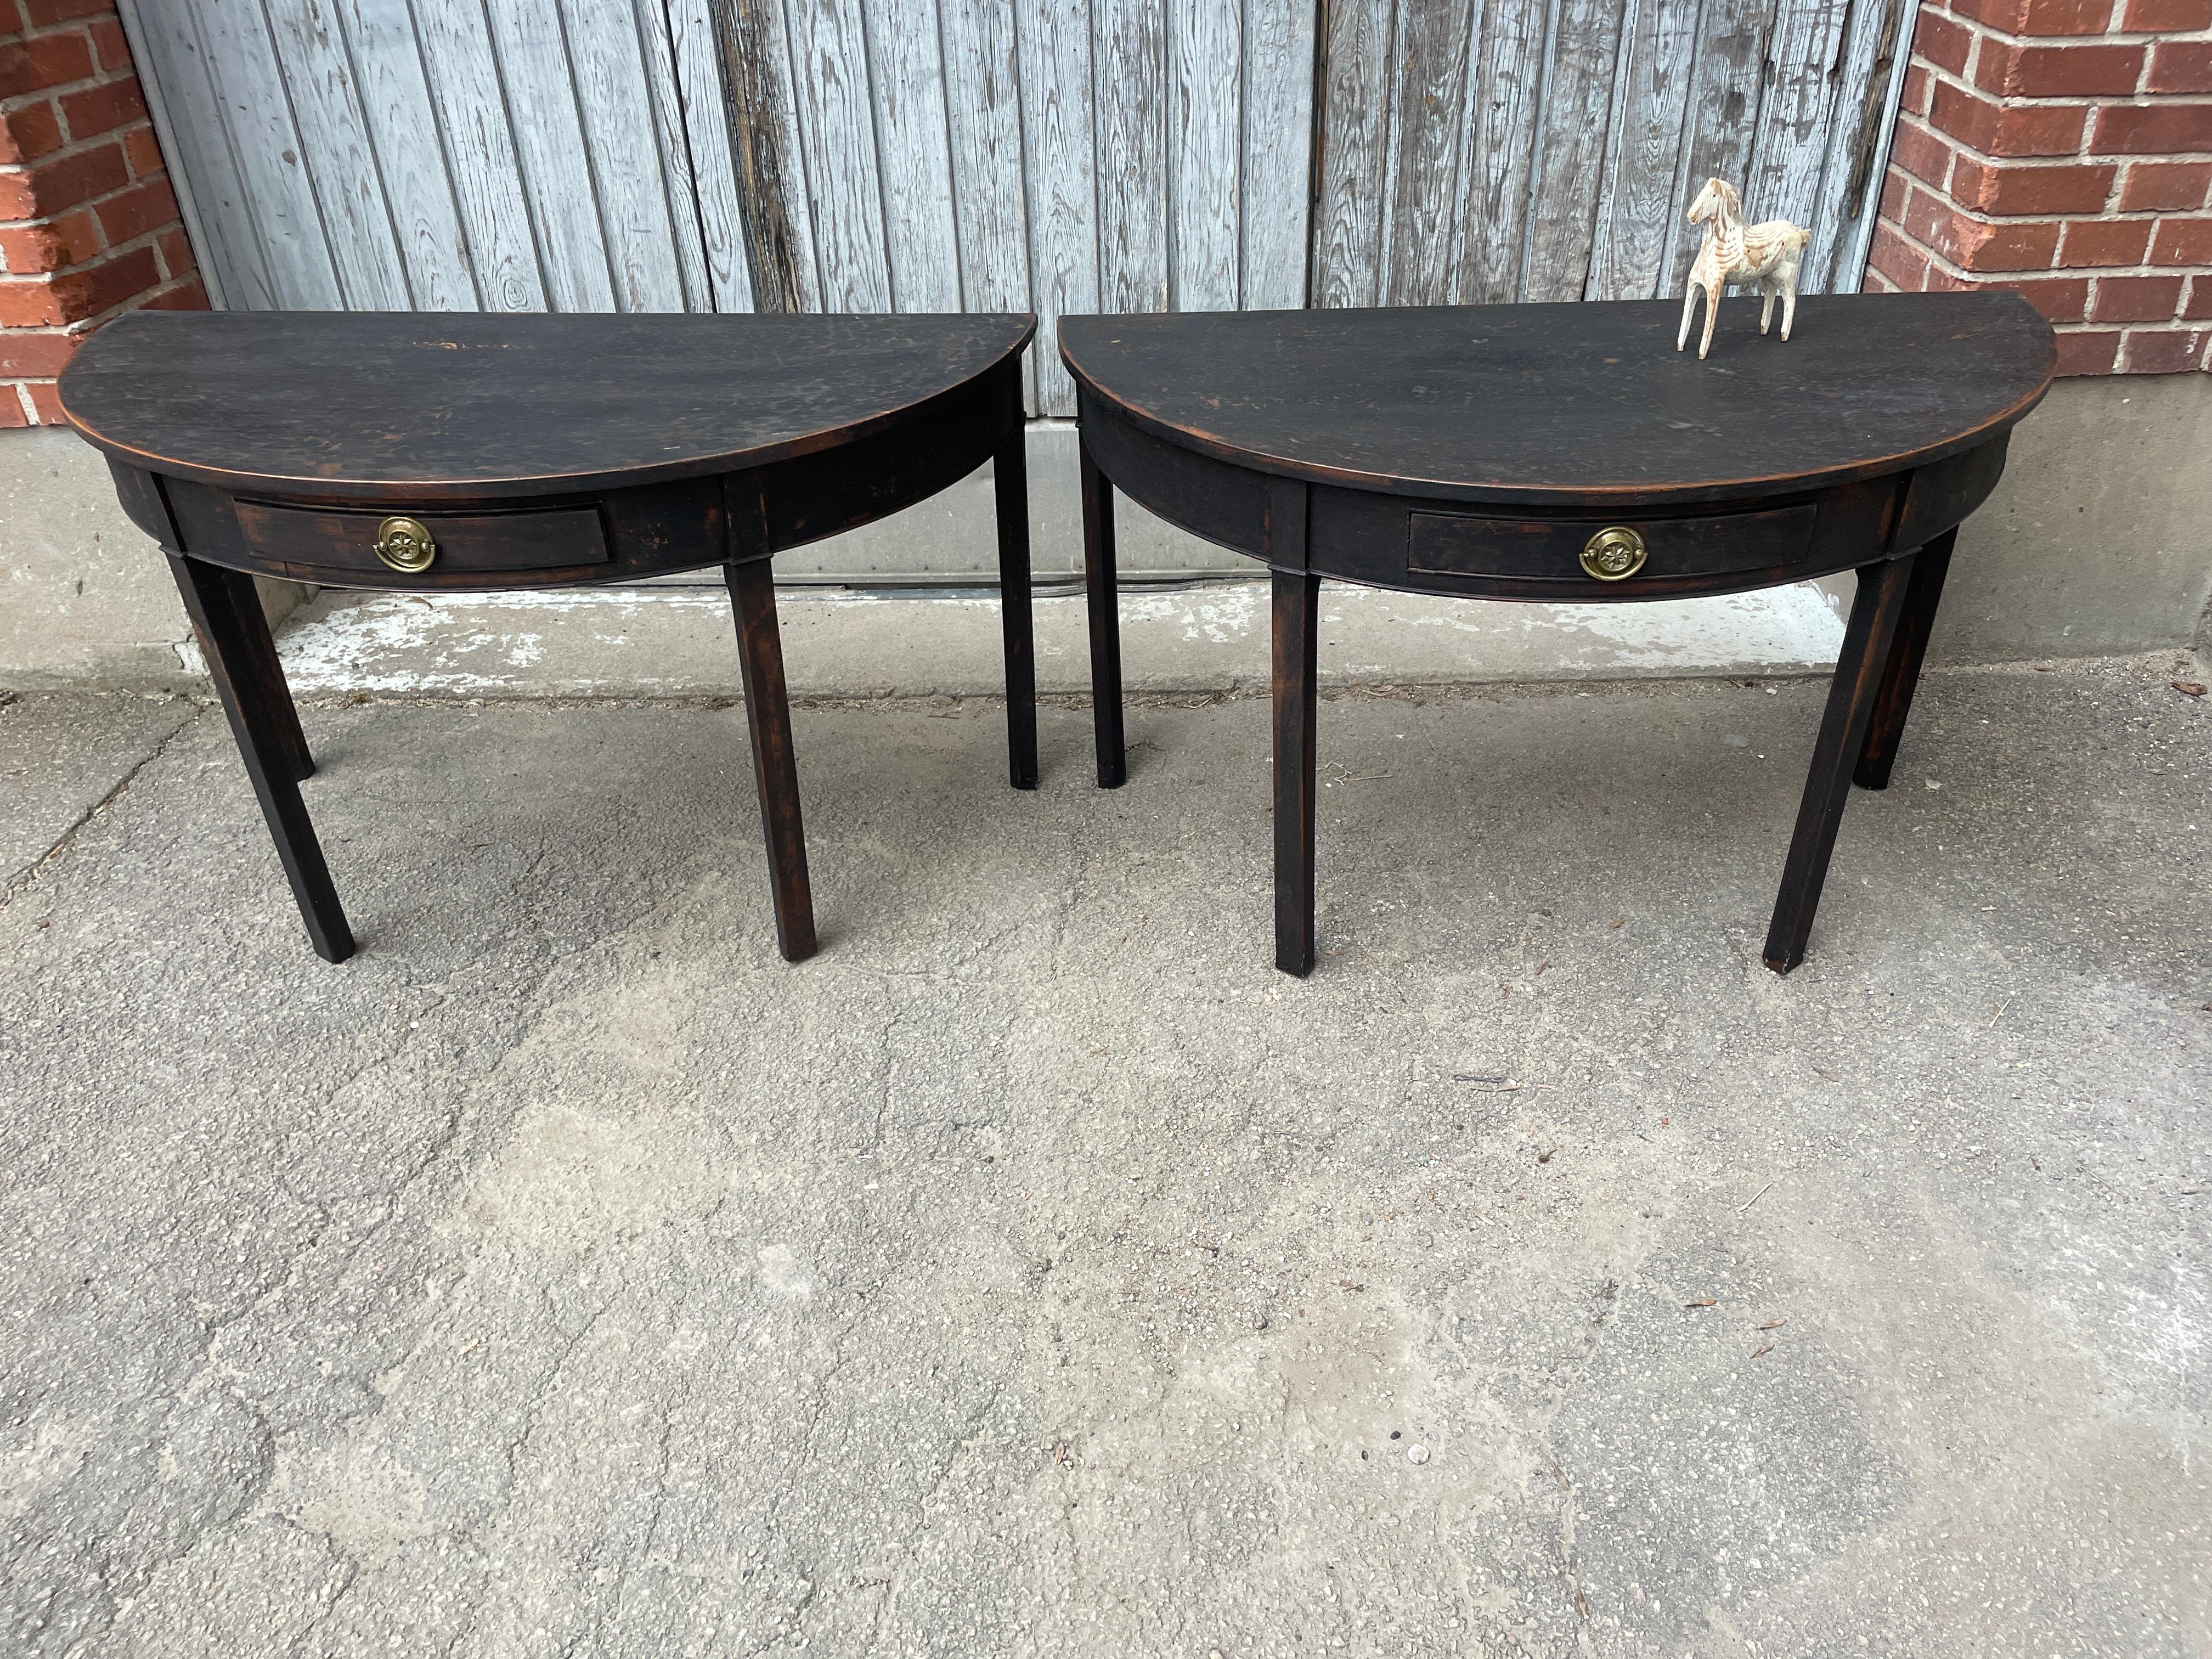 Hand-Painted Pair of Black Painted Gustavian Demilune Table Consoles For Sale